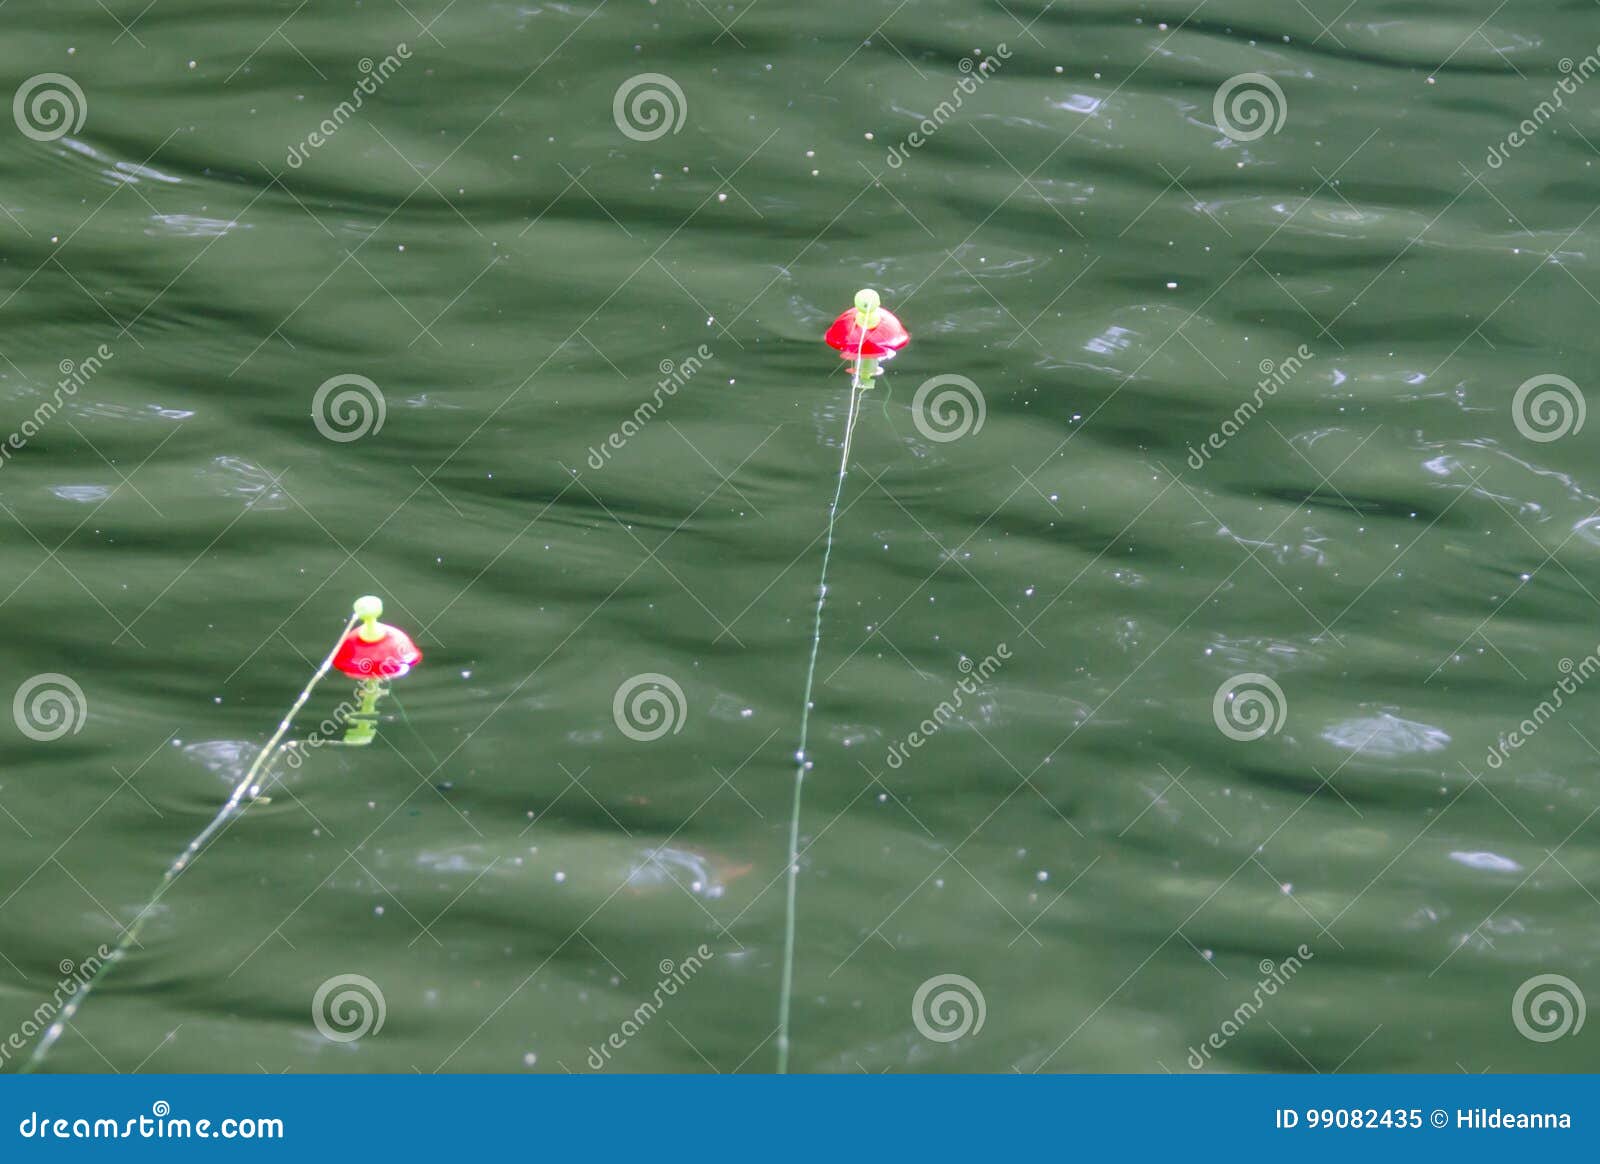 https://thumbs.dreamstime.com/z/two-fishing-bobbers-floating-lake-river-water-waters-fun-outdoor-recreational-activity-relax-enjoy-sport-99082435.jpg